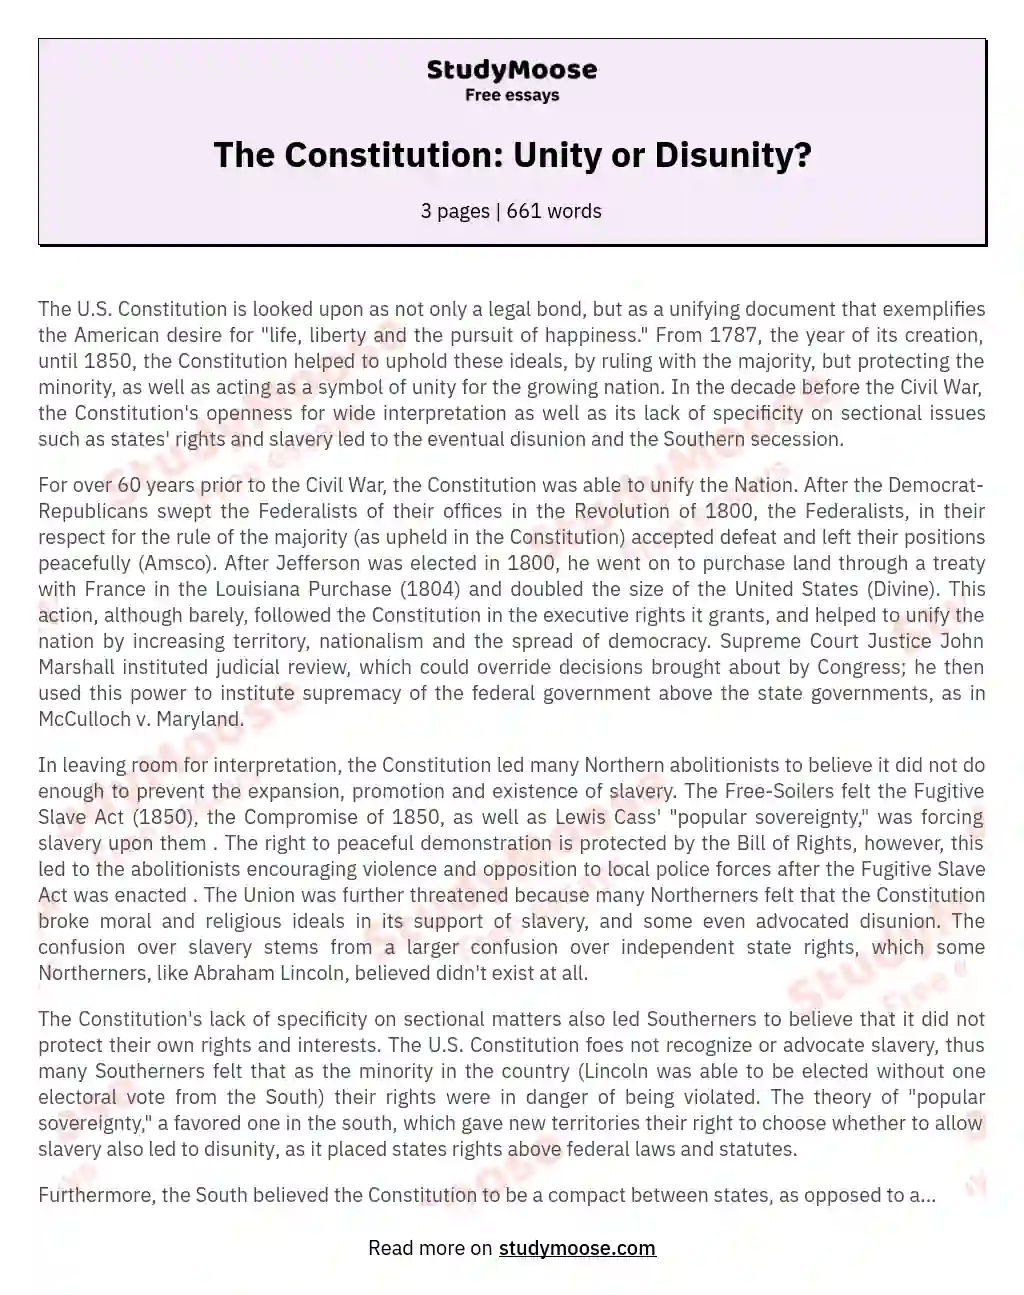 The Constitution: Unity or Disunity? essay